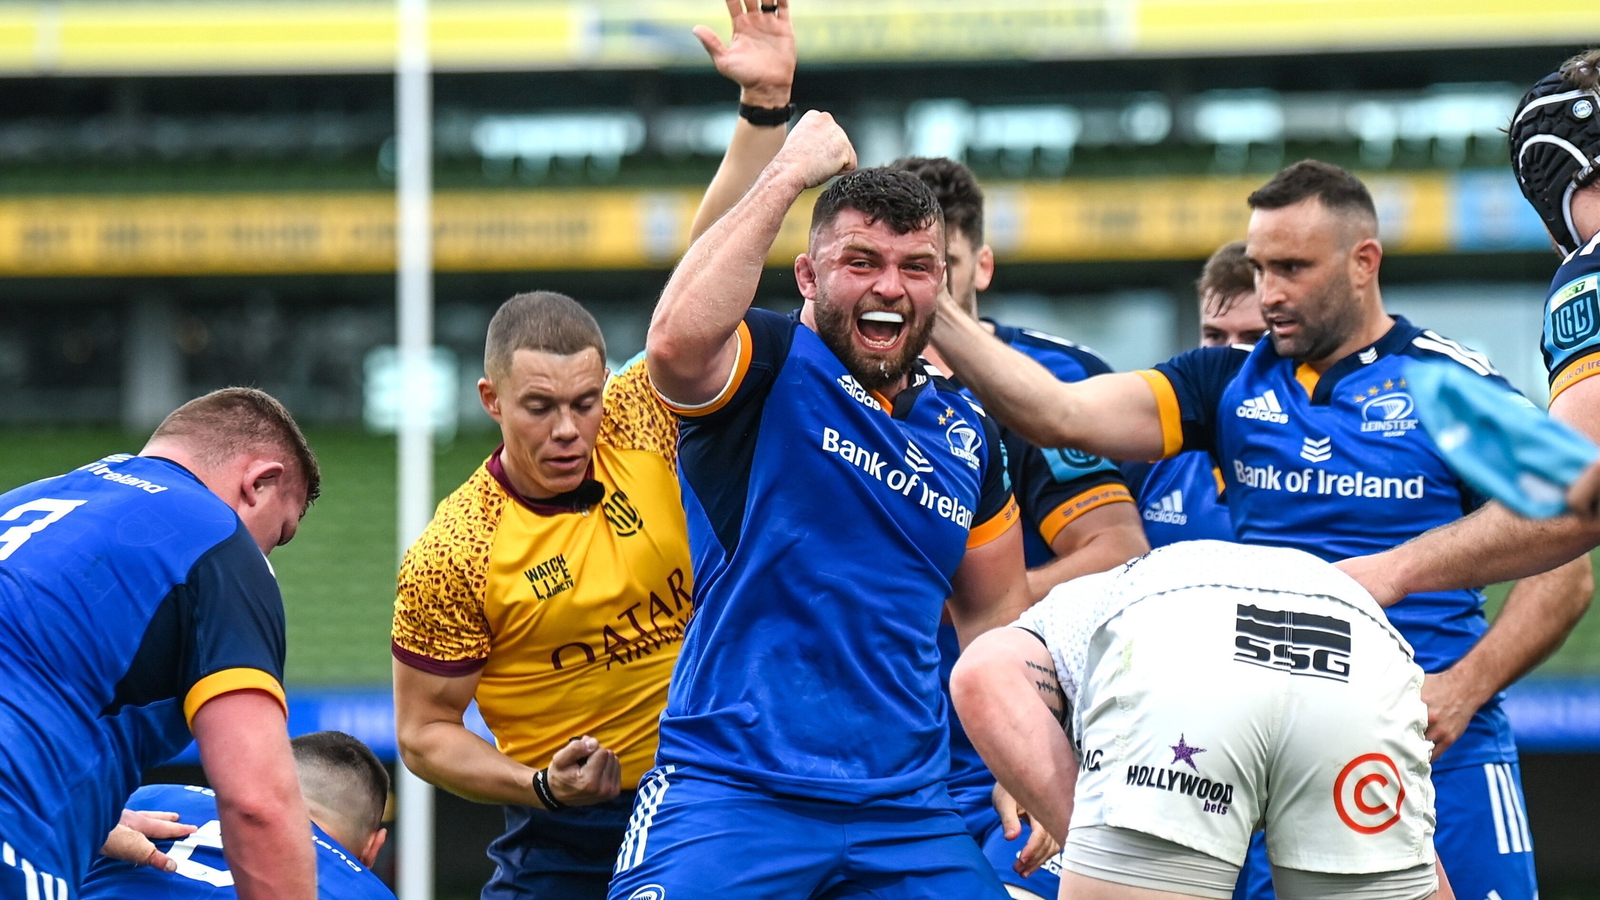 Recap Leinster coast past Sharks in one-sided affair